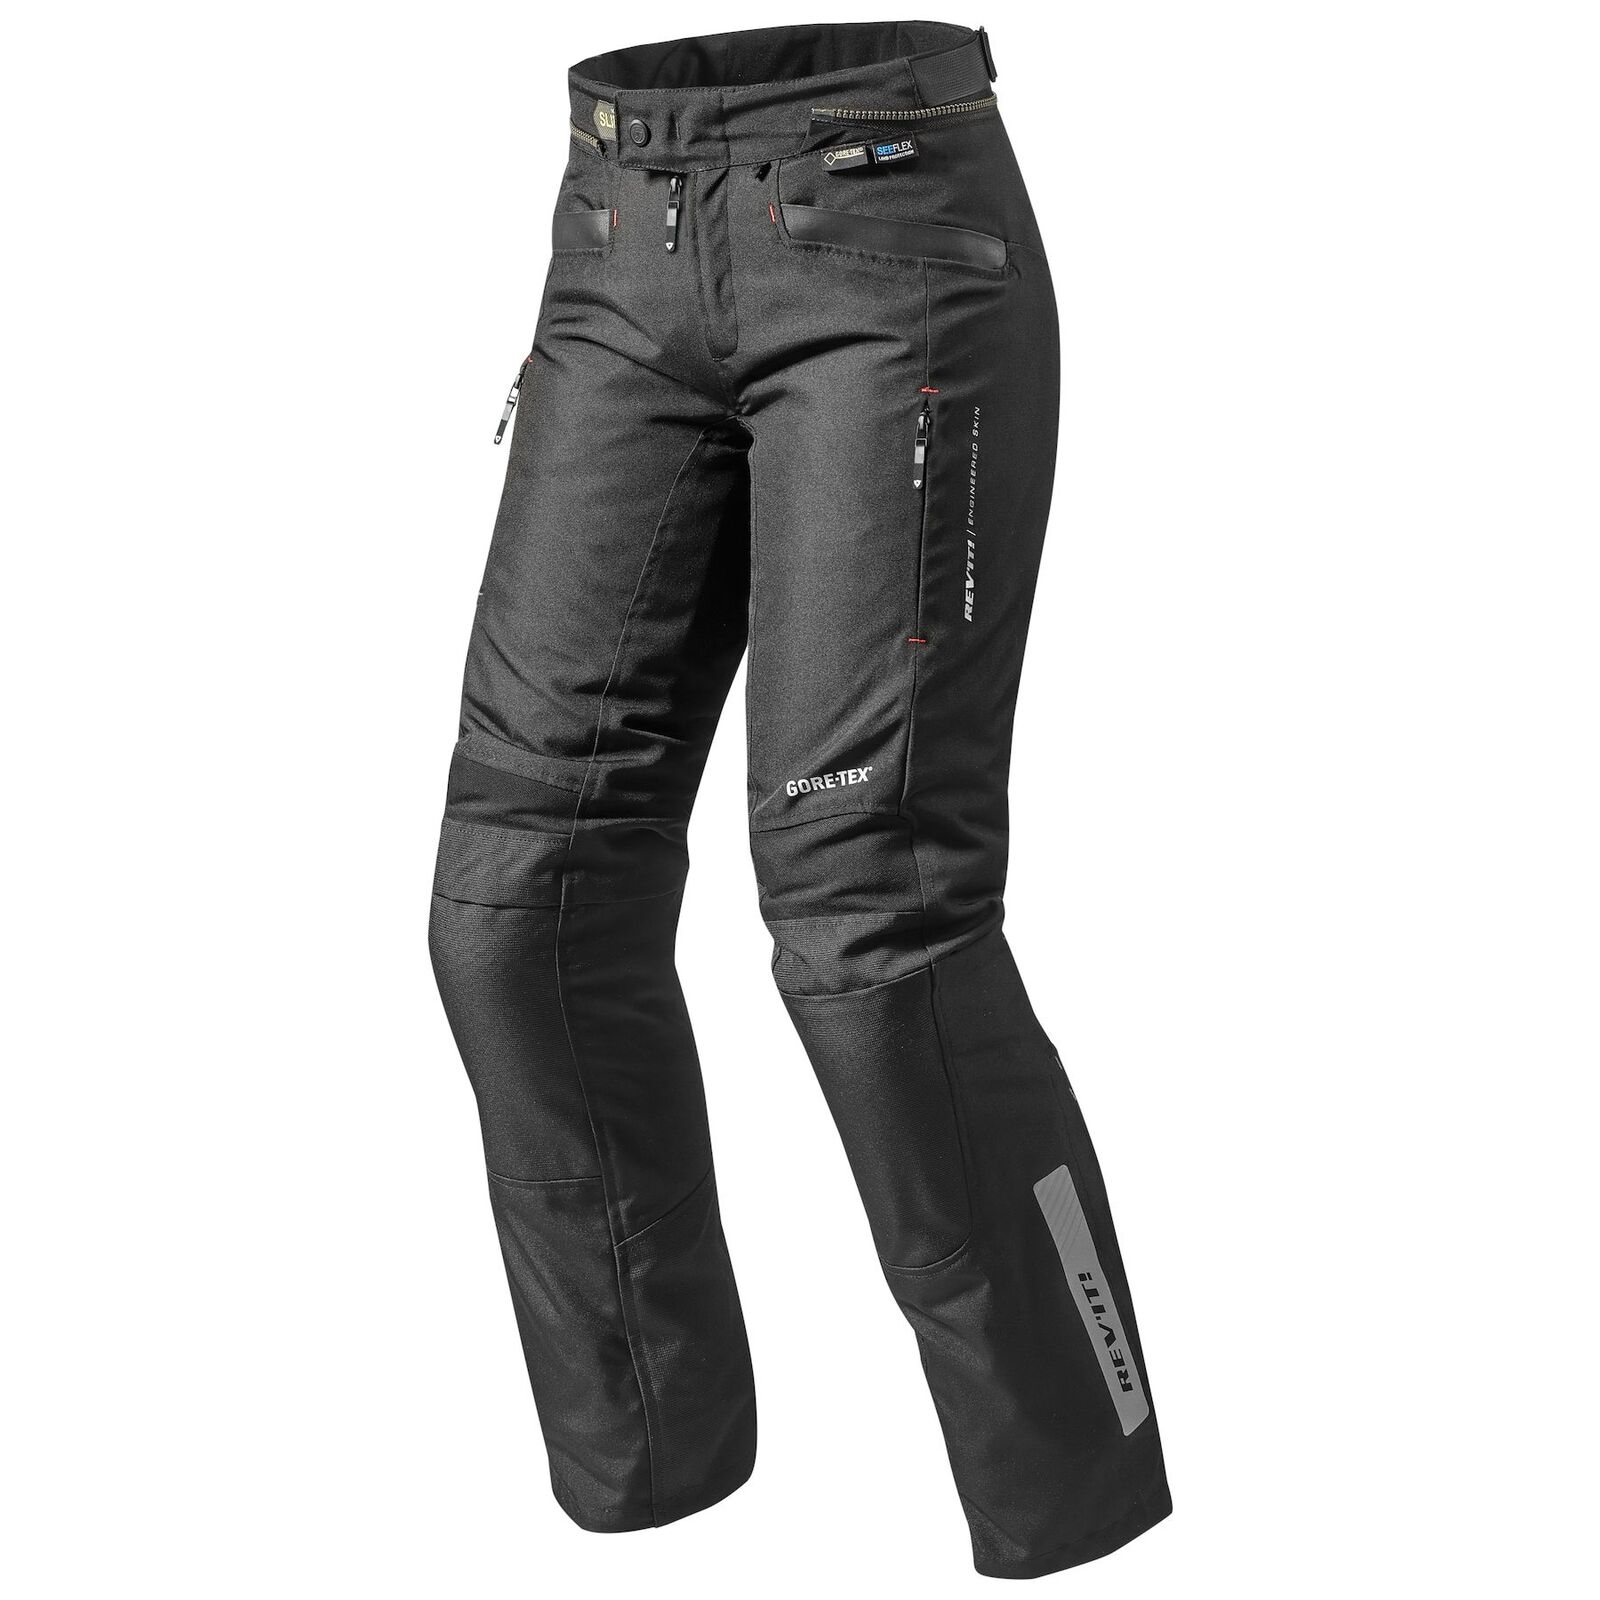 REV'IT! Neptune GTX Ladies Motorcycle Pants :: Express Post Delivery